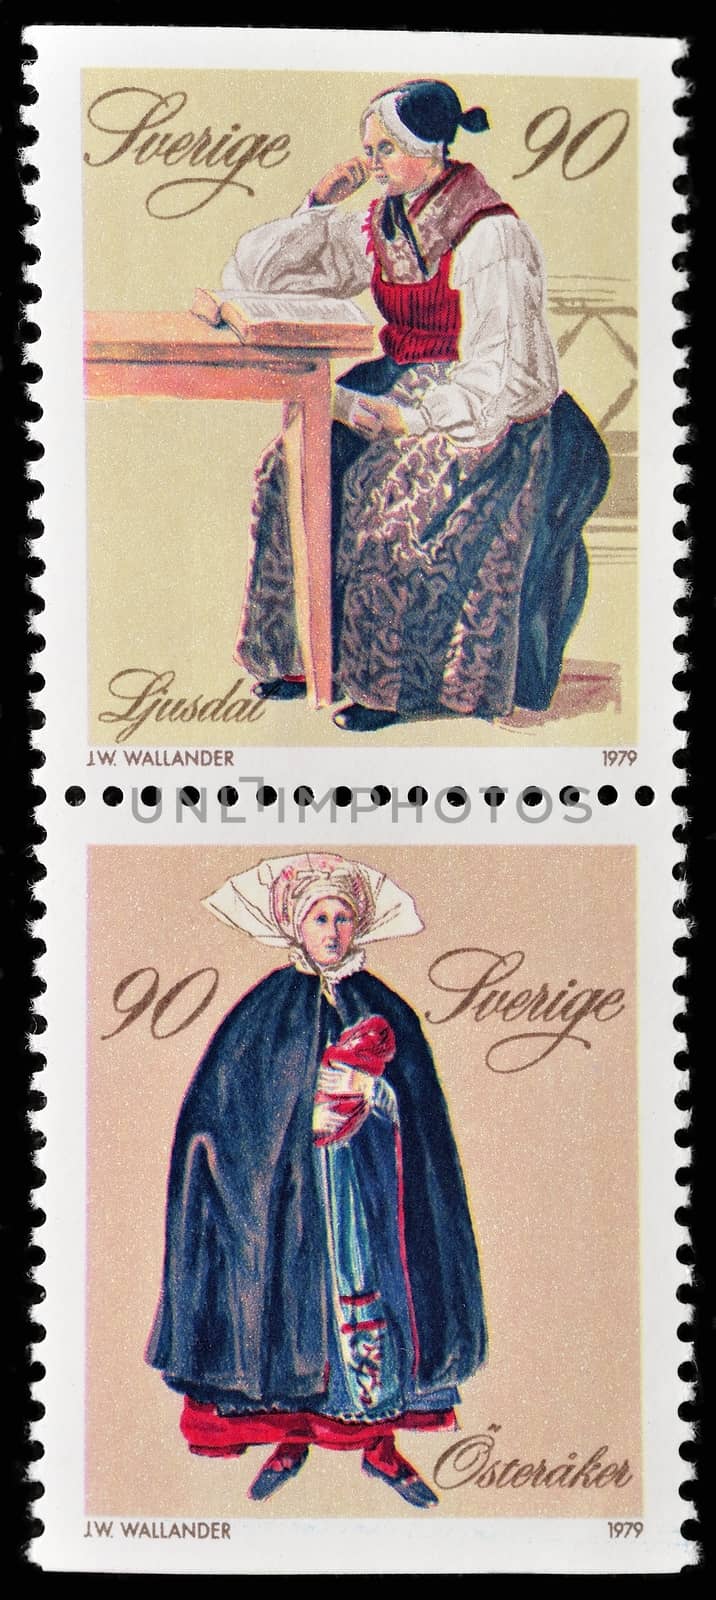 SWEDEN - CIRCA 1979: stamp printed by Sweden, shows woman and traditional costume, circa 1979